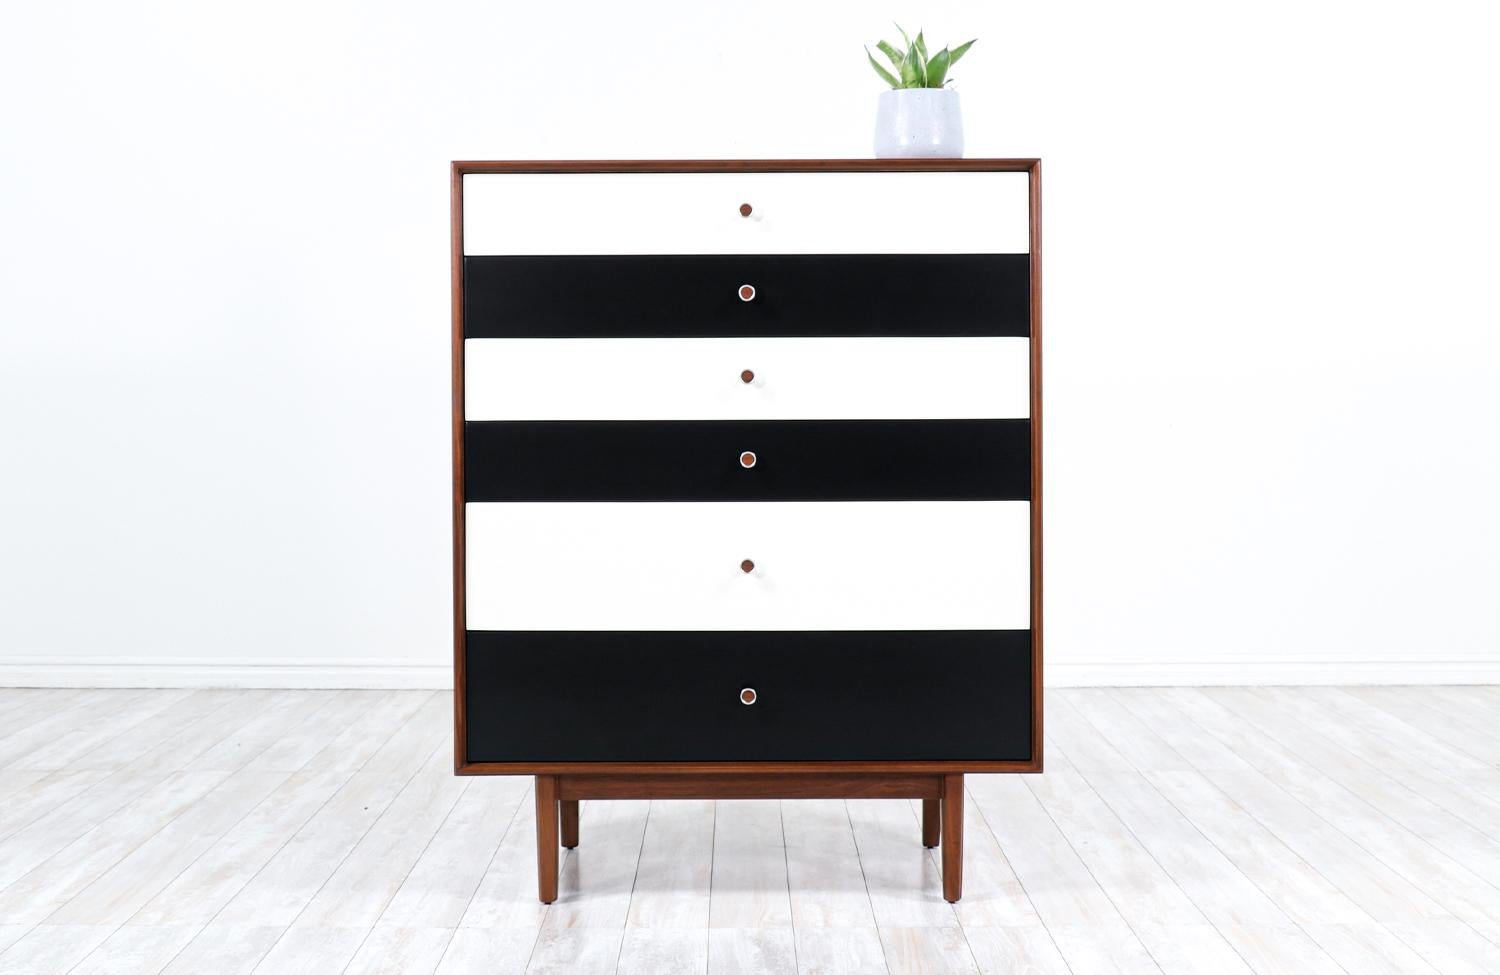 Milo Baughman two-tone lacquered highboy for Glenn of California.

________________________________________

Transforming a piece of Mid-Century Modern furniture is like bringing history back to life, and we take this journey with passion and